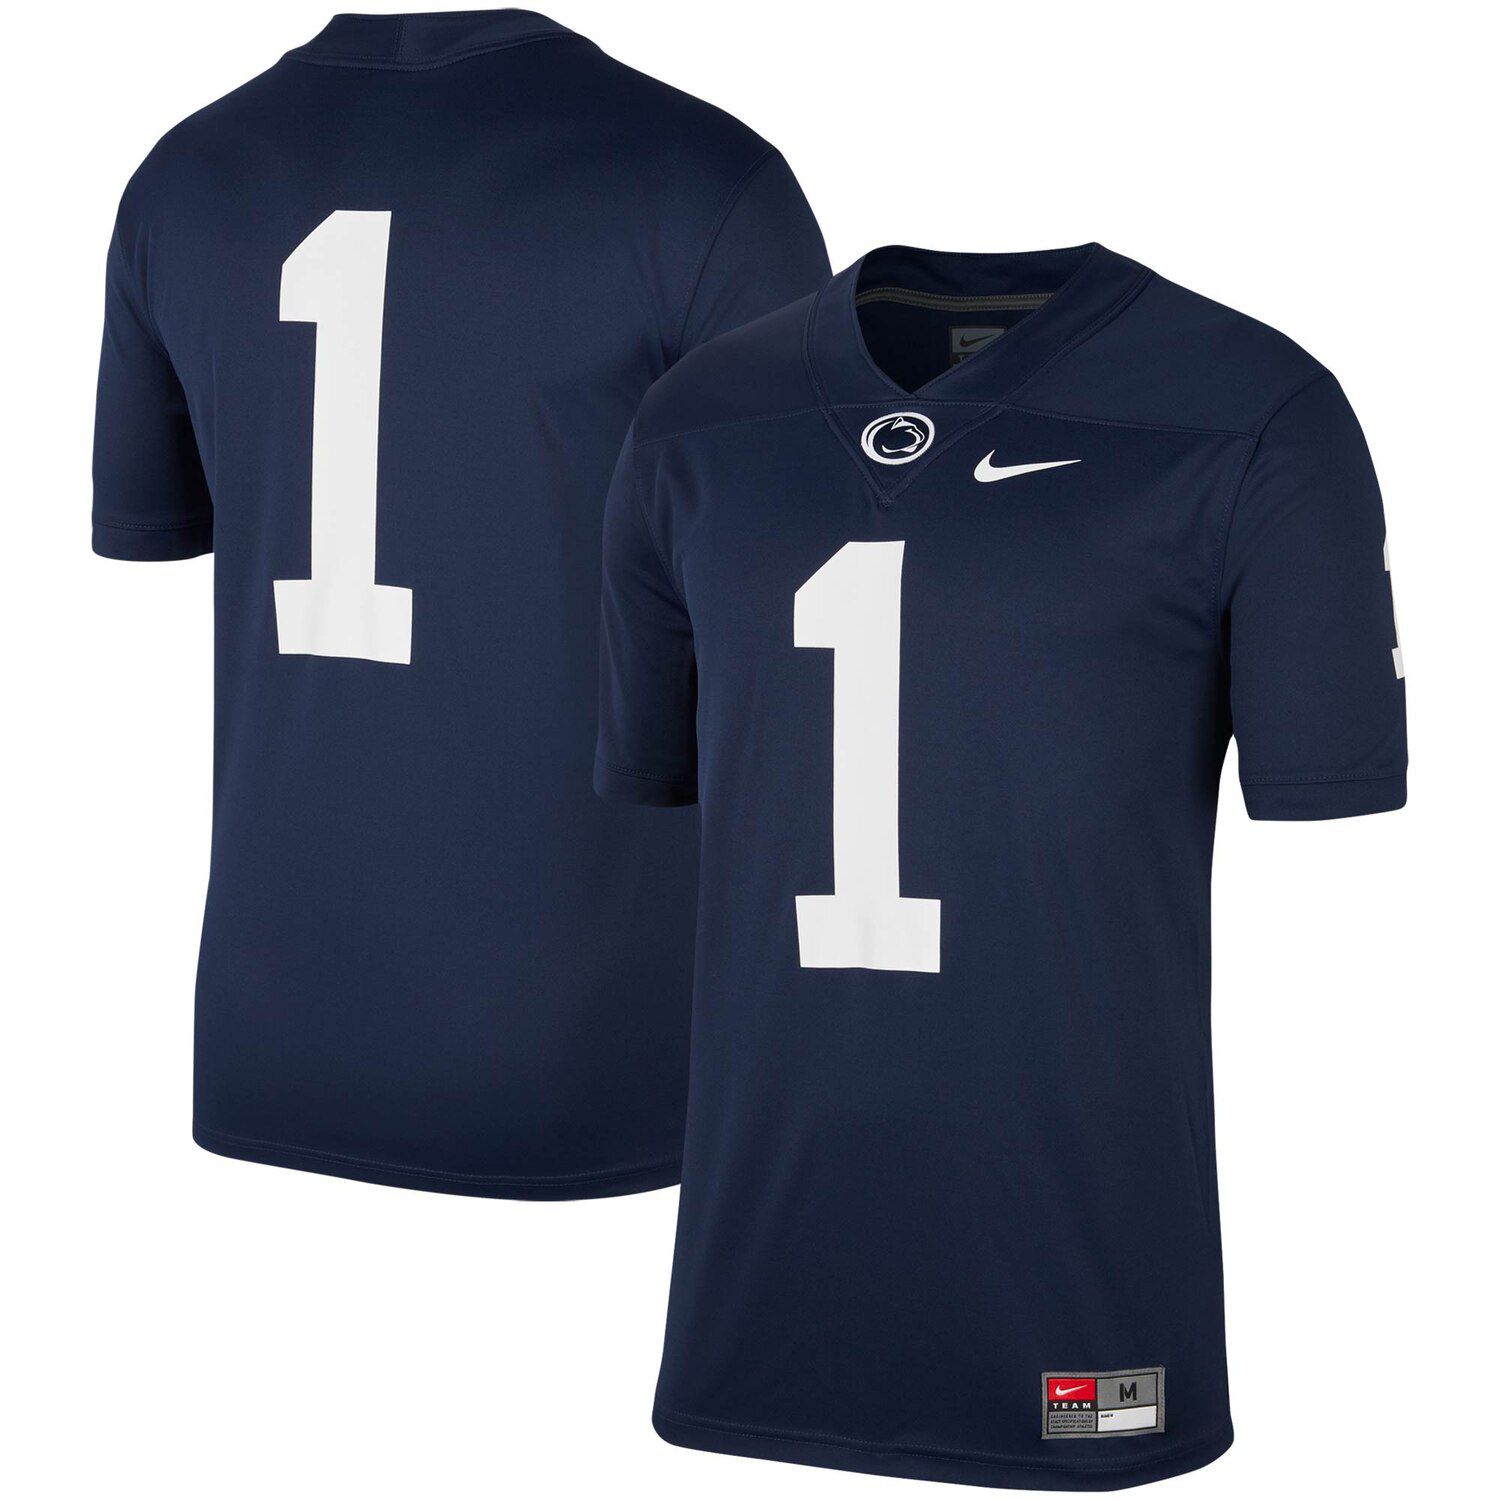 nittany lions jersey